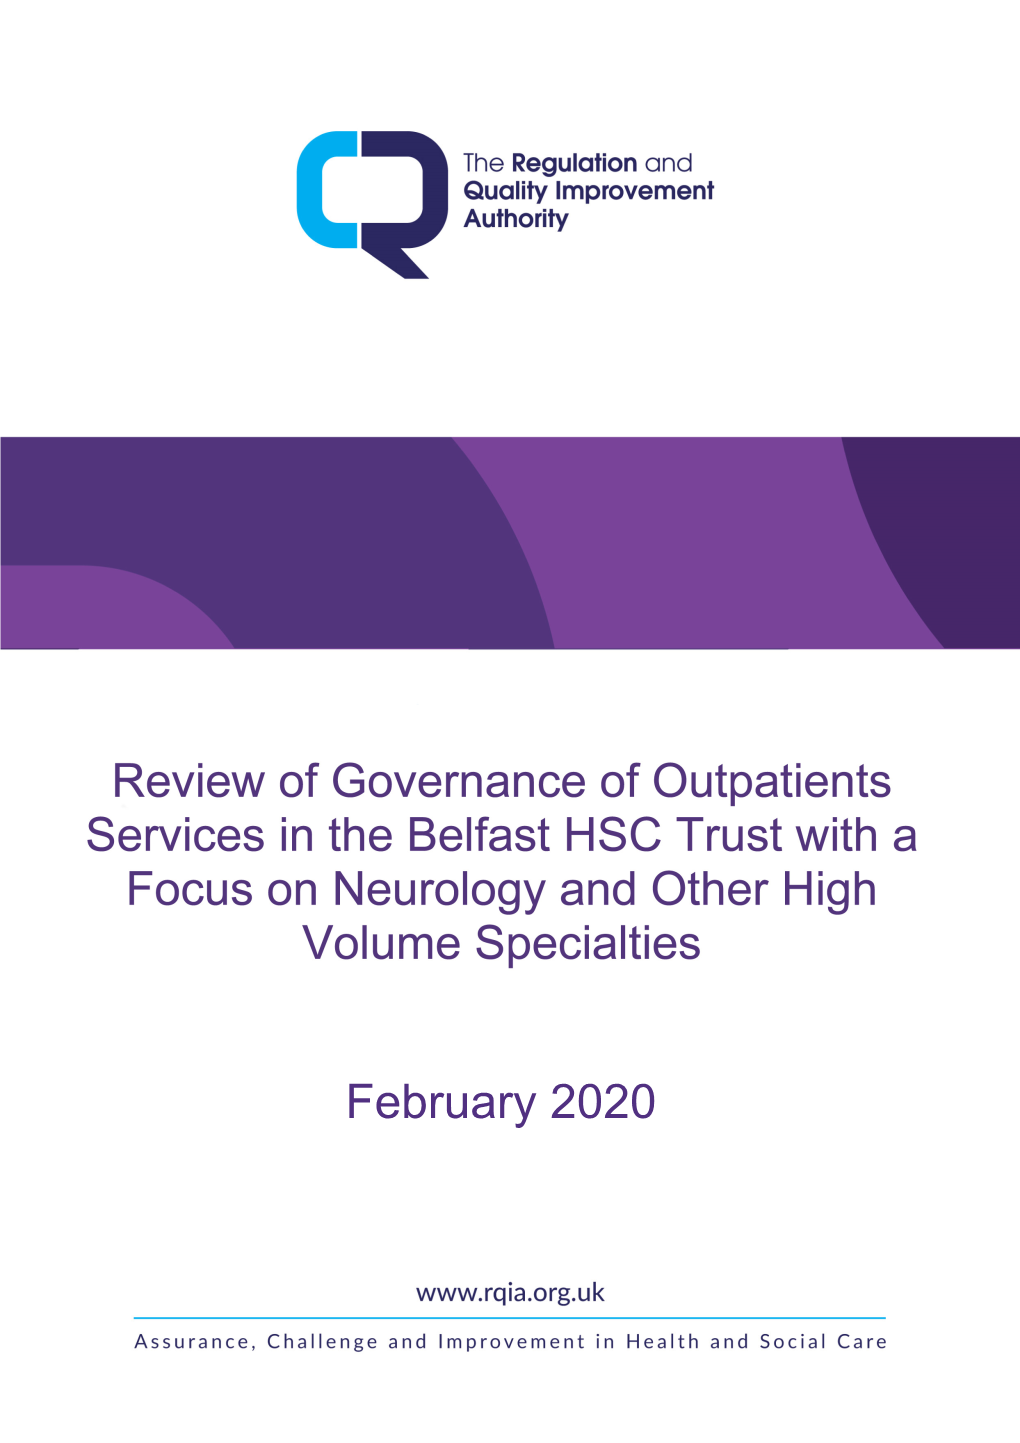 Review of Governance of Outpatients Services in the Belfast HSC Trust with a Focus on Neurology and Other High Volume Specialties